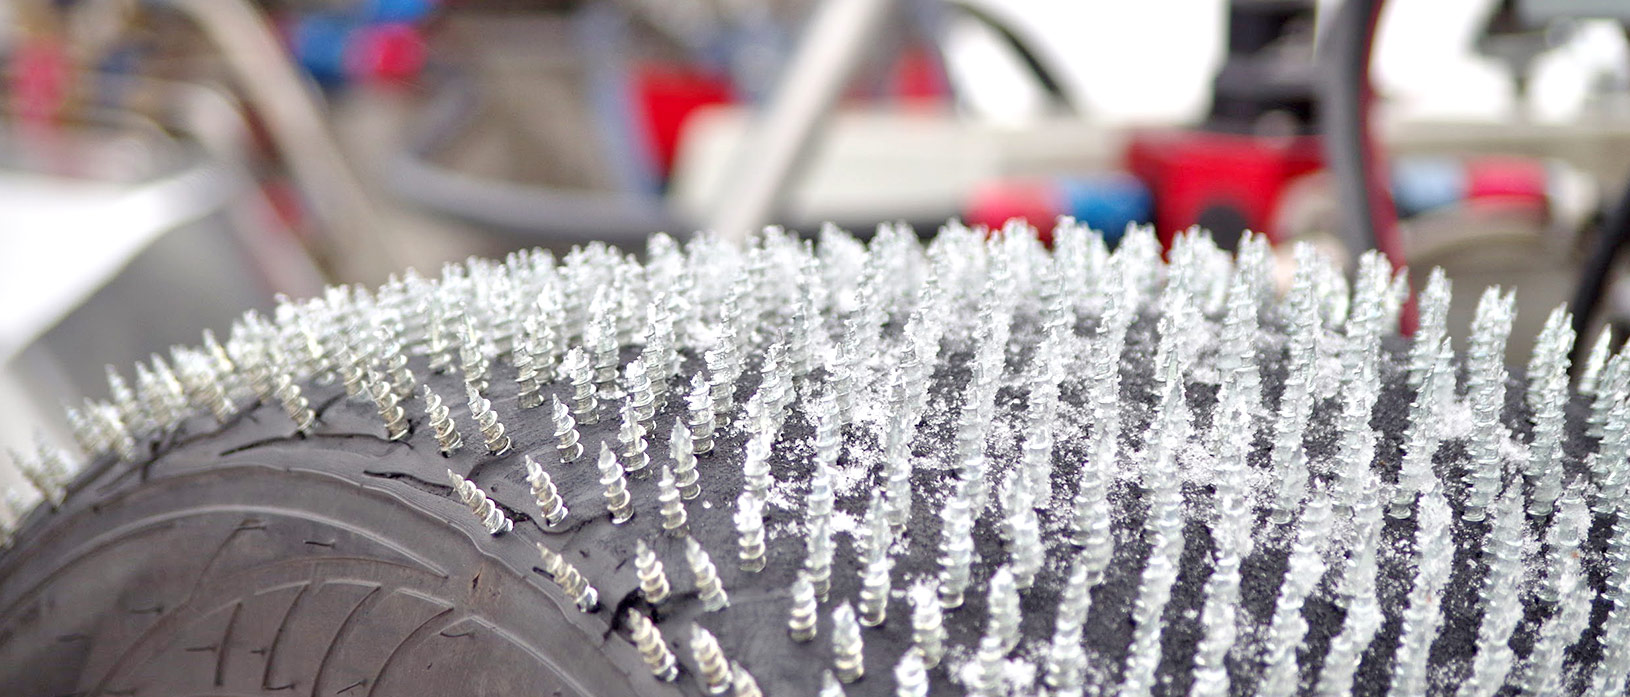 Close up of screws drilled throughout tire making an ice drag radial